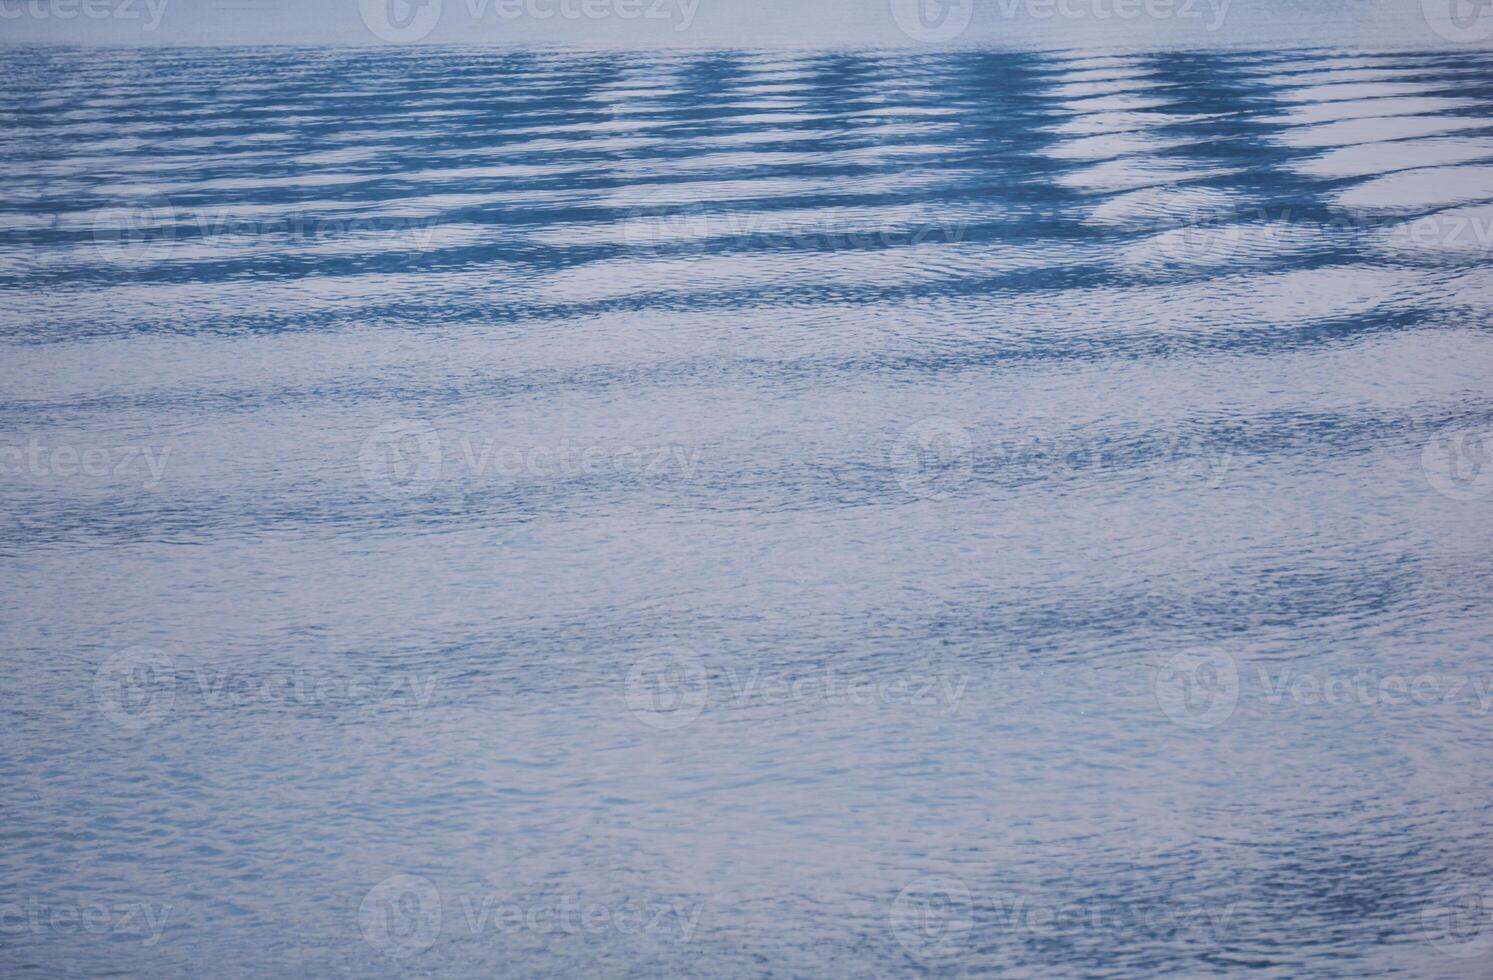 natural background - waves and ripples on the water surface photo